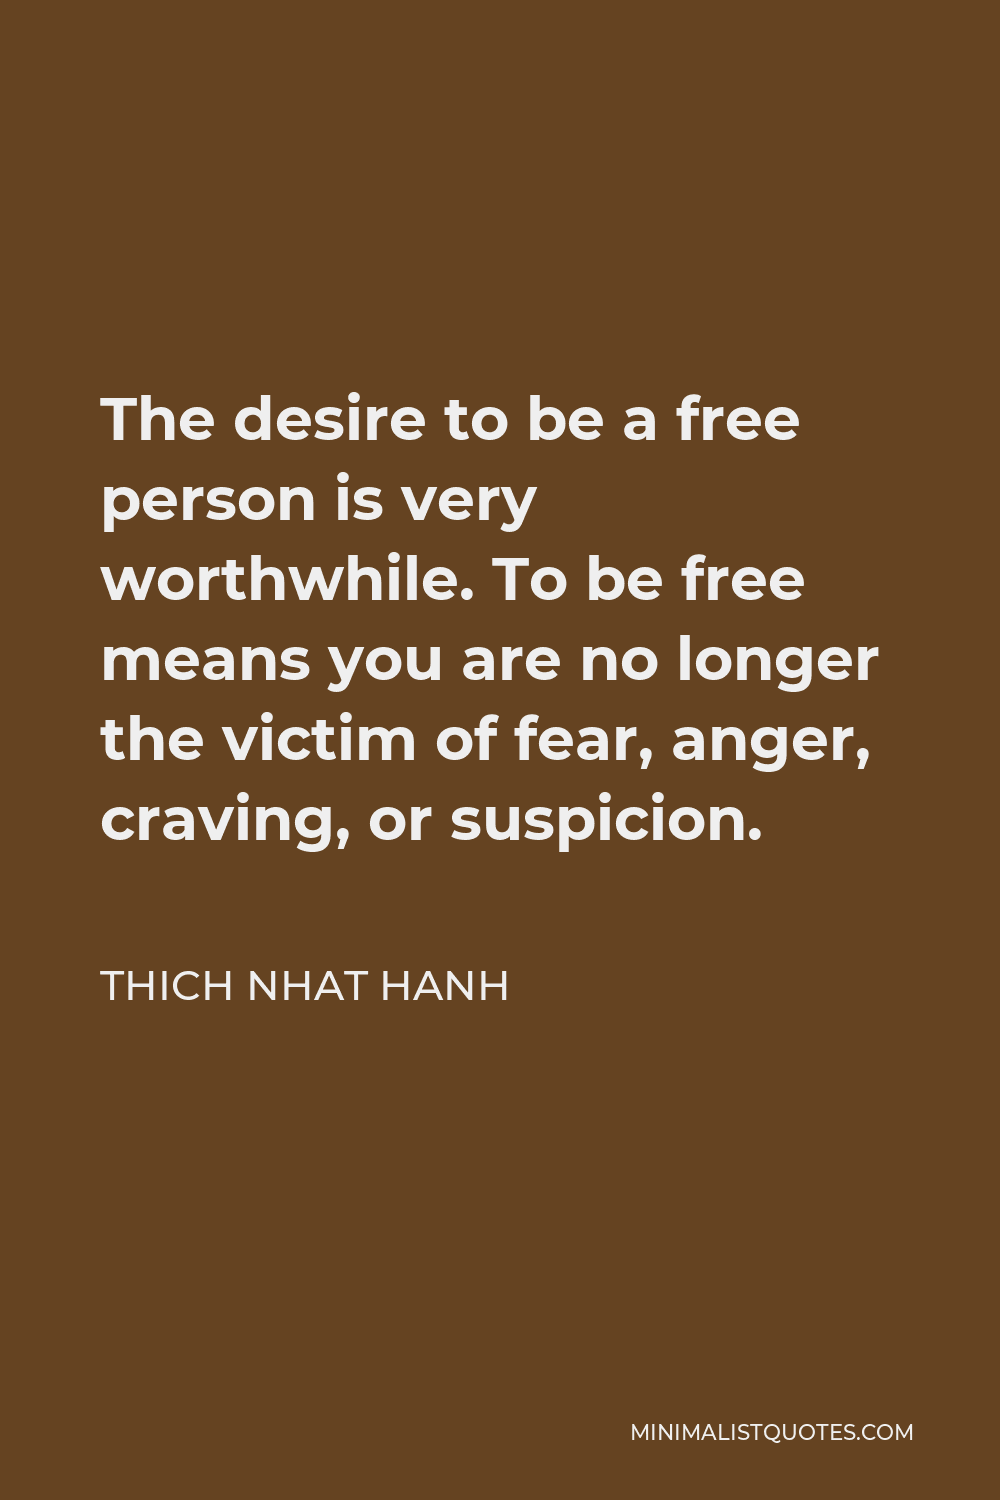 Thich Nhat Hanh Quote - The desire to be a free person is very worthwhile. To be free means you are no longer the victim of fear, anger, craving, or suspicion.